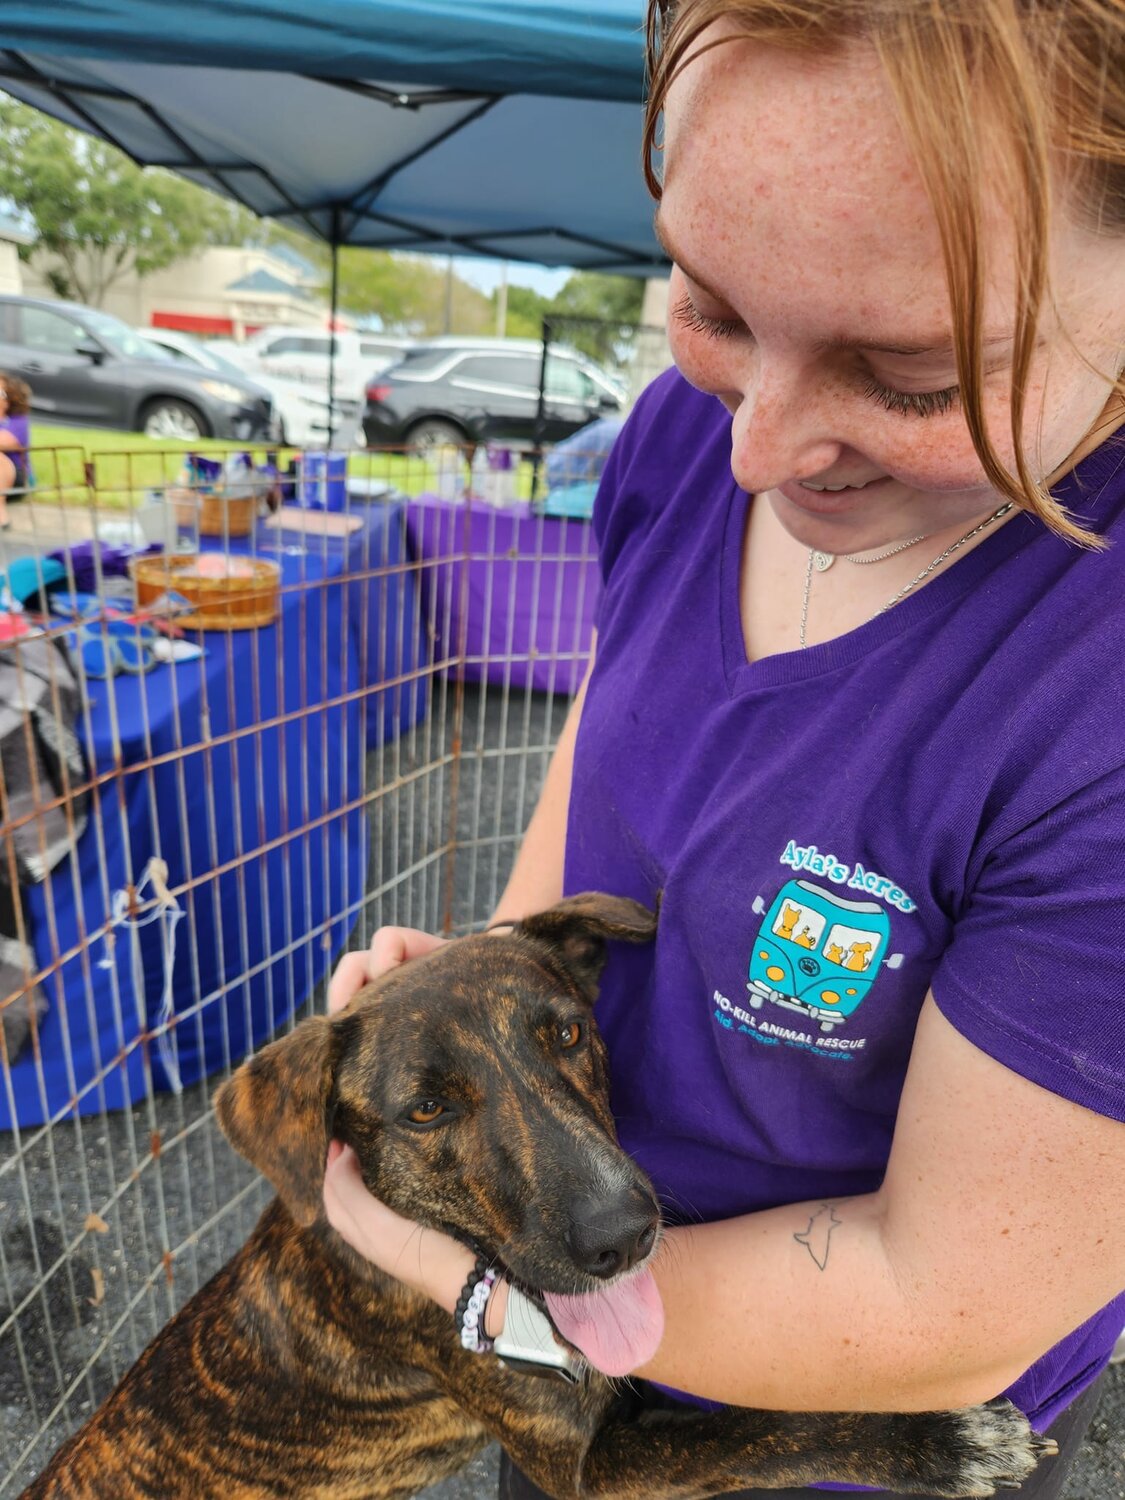 A pet adoption event was held in the Underwood Jewelers Ponte Vedra Beach location parking lot in partnership with Ayla’s Acres on Nov. 4.